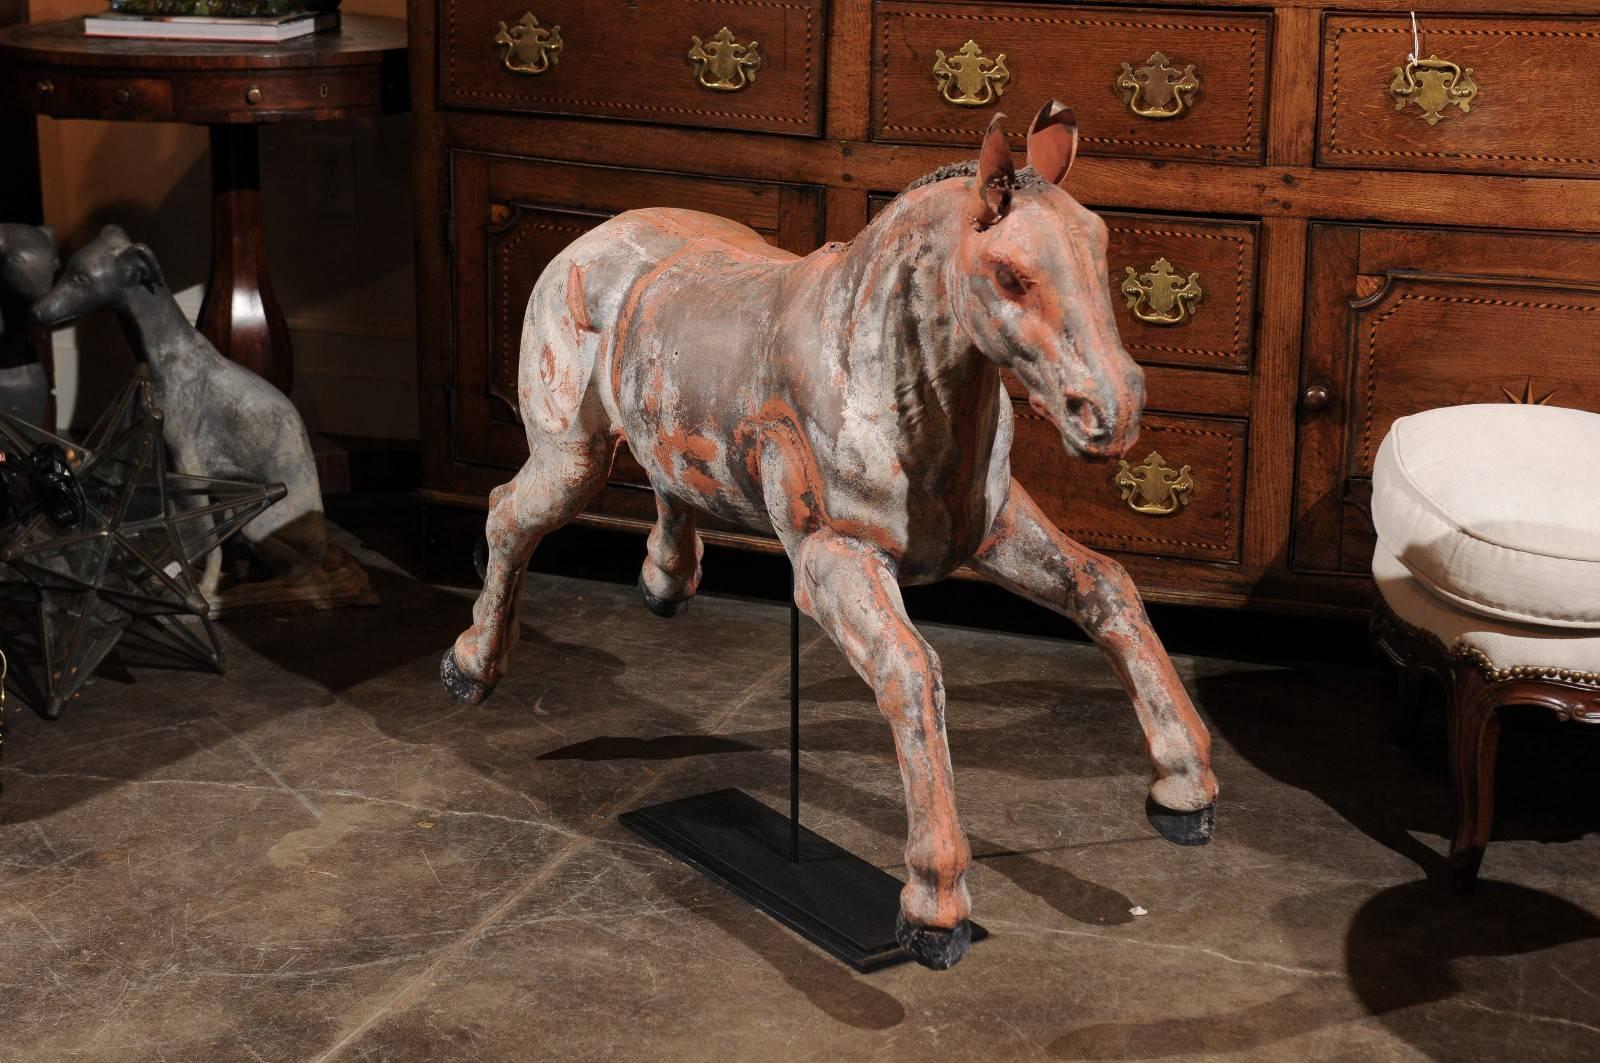 An exquisite continental foal baby horse from the early 20th century mounted on iron base. This joyful foal is caught in mid leap as it’s possibly just learning how to gallop. See how its legs are shorter and more stout than a full grown horse and